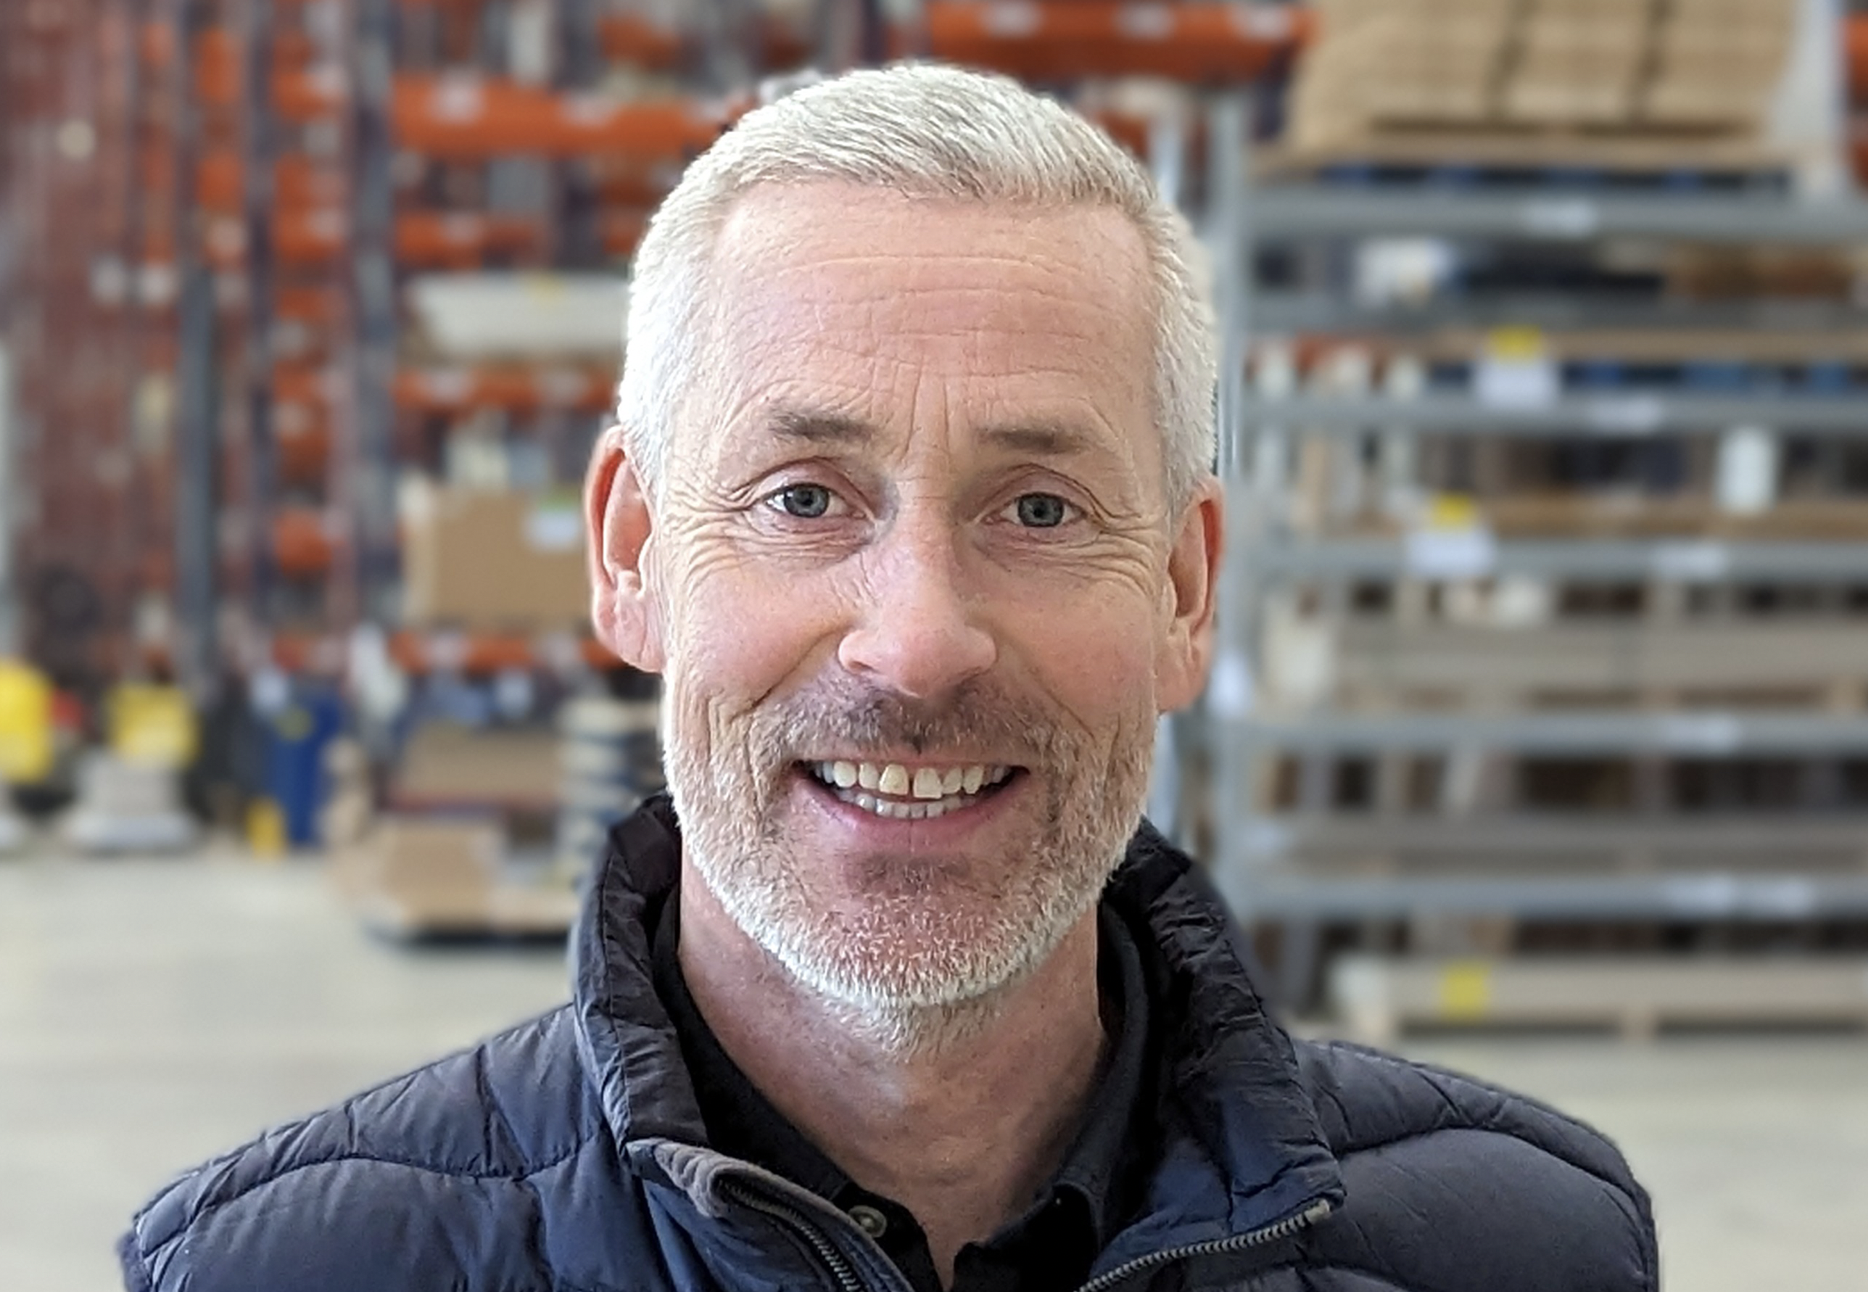 Easy Bathrooms appoints experienced industry figure to drive trade sales